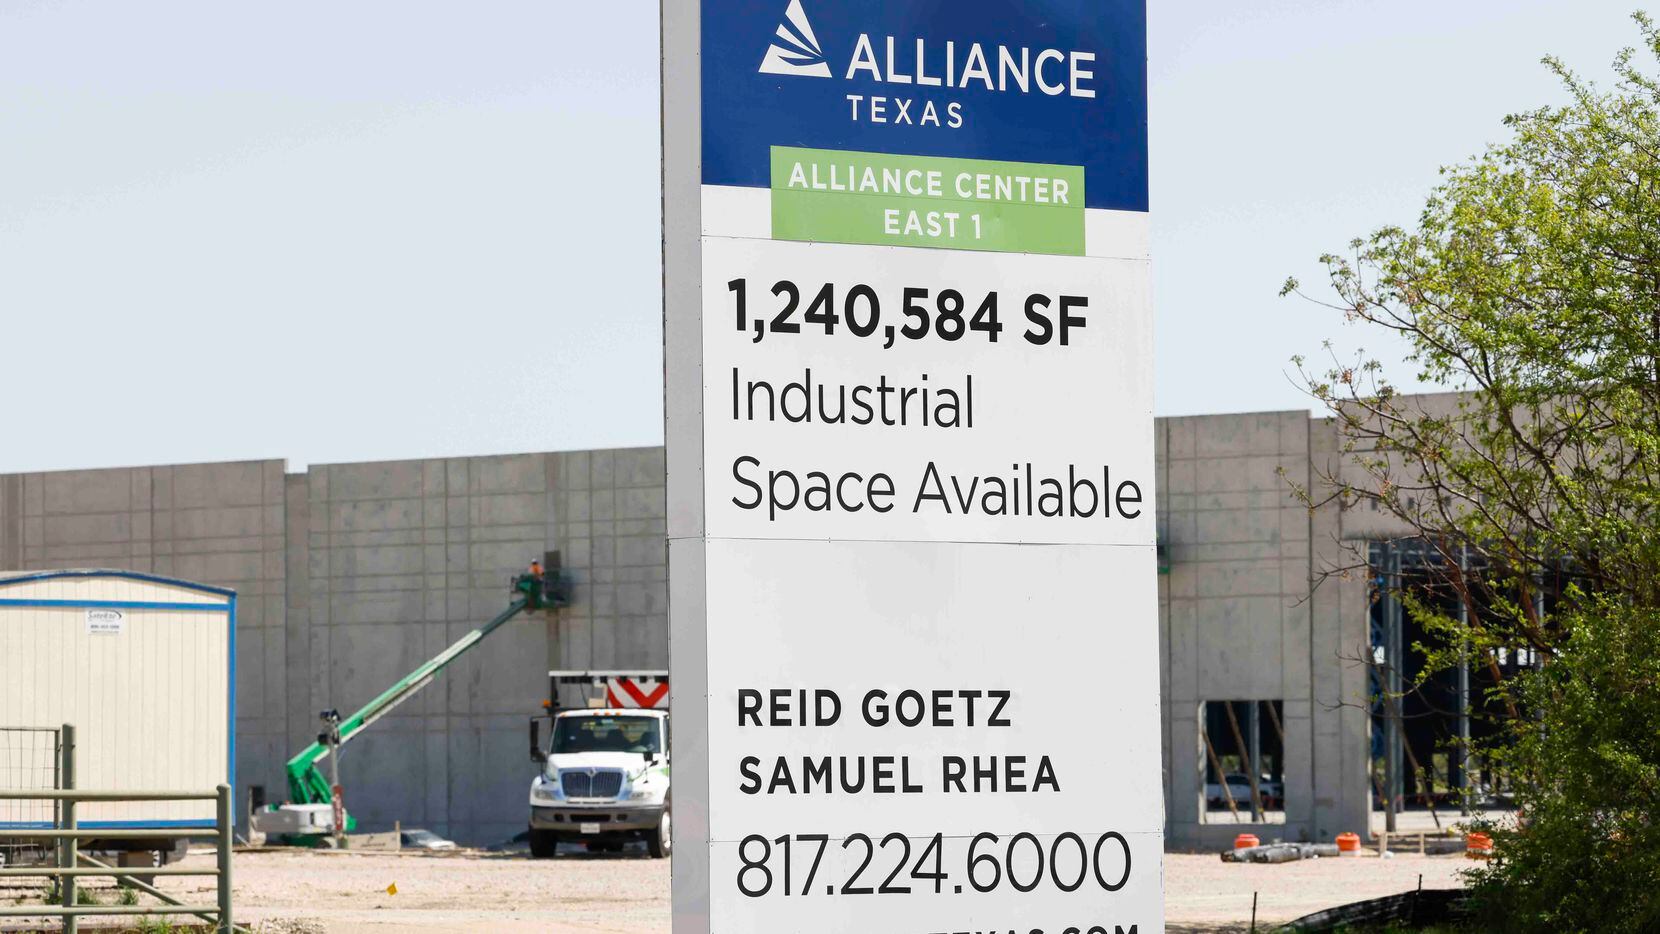 The Alliance Center East 1 building is under construction on the east side of I-35W in North...